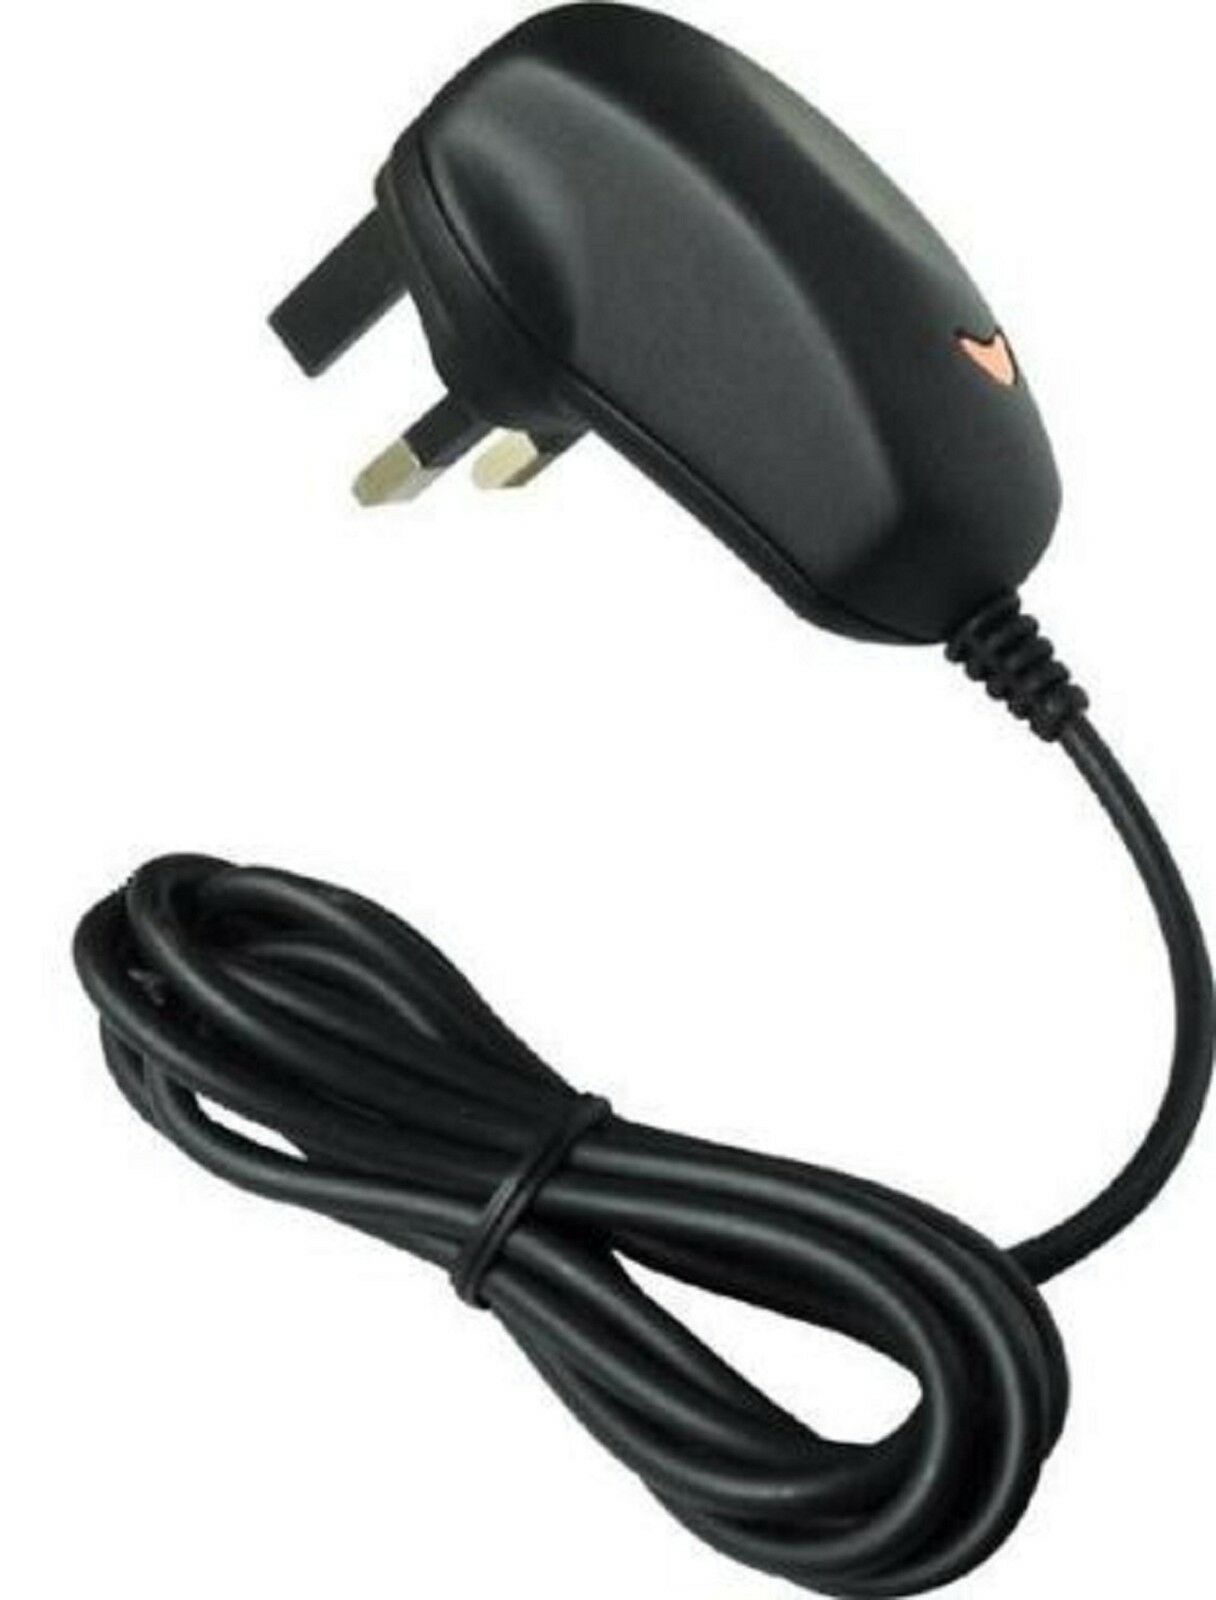 Uk Mains House Charger For Navman Ezy Wide Gps Sat Nav Easy Travel Wall Charger